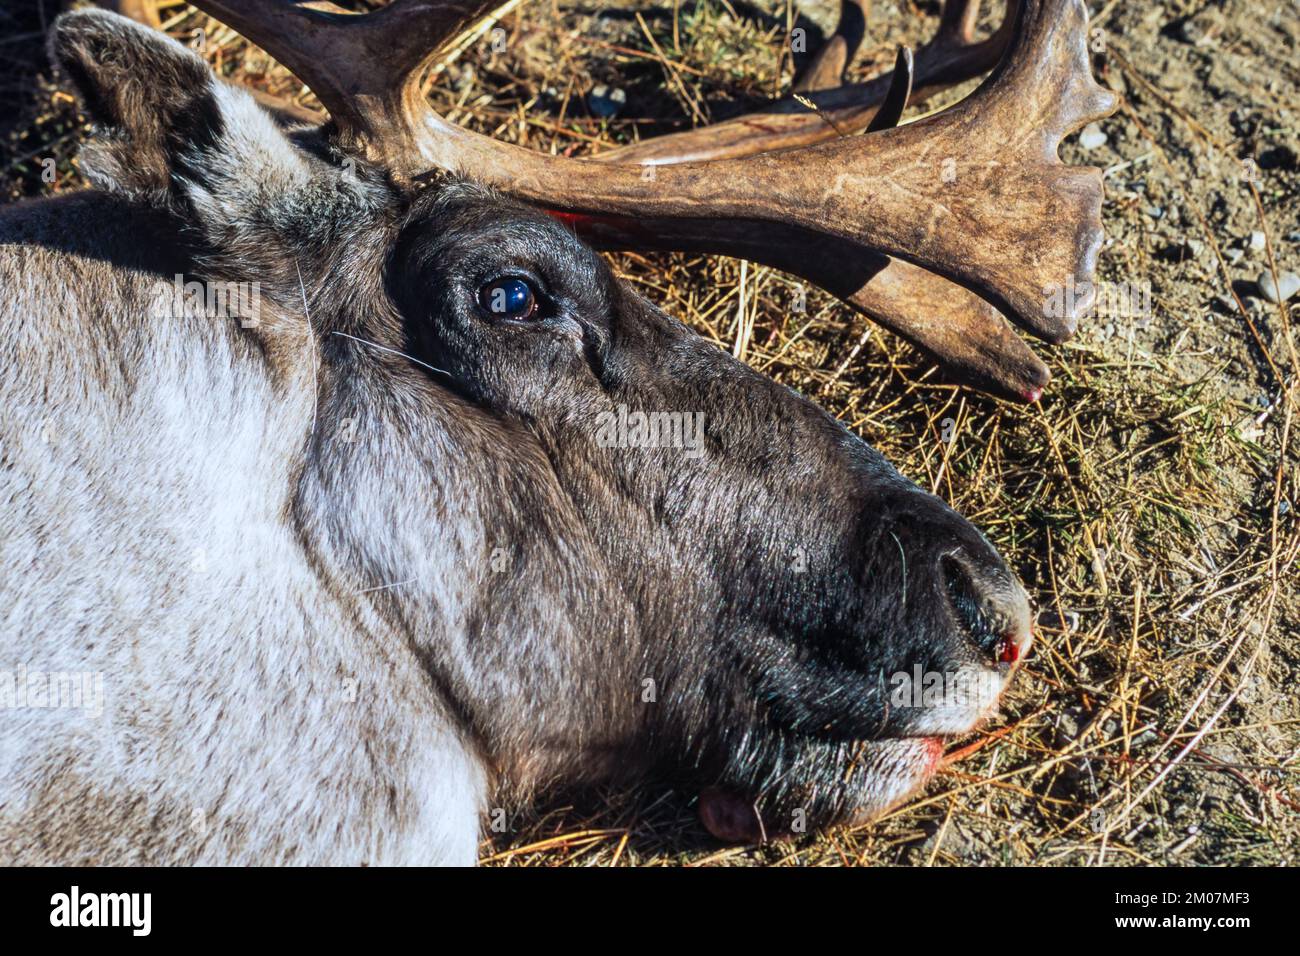 Dead reindeer lying on the ground Stock Photo